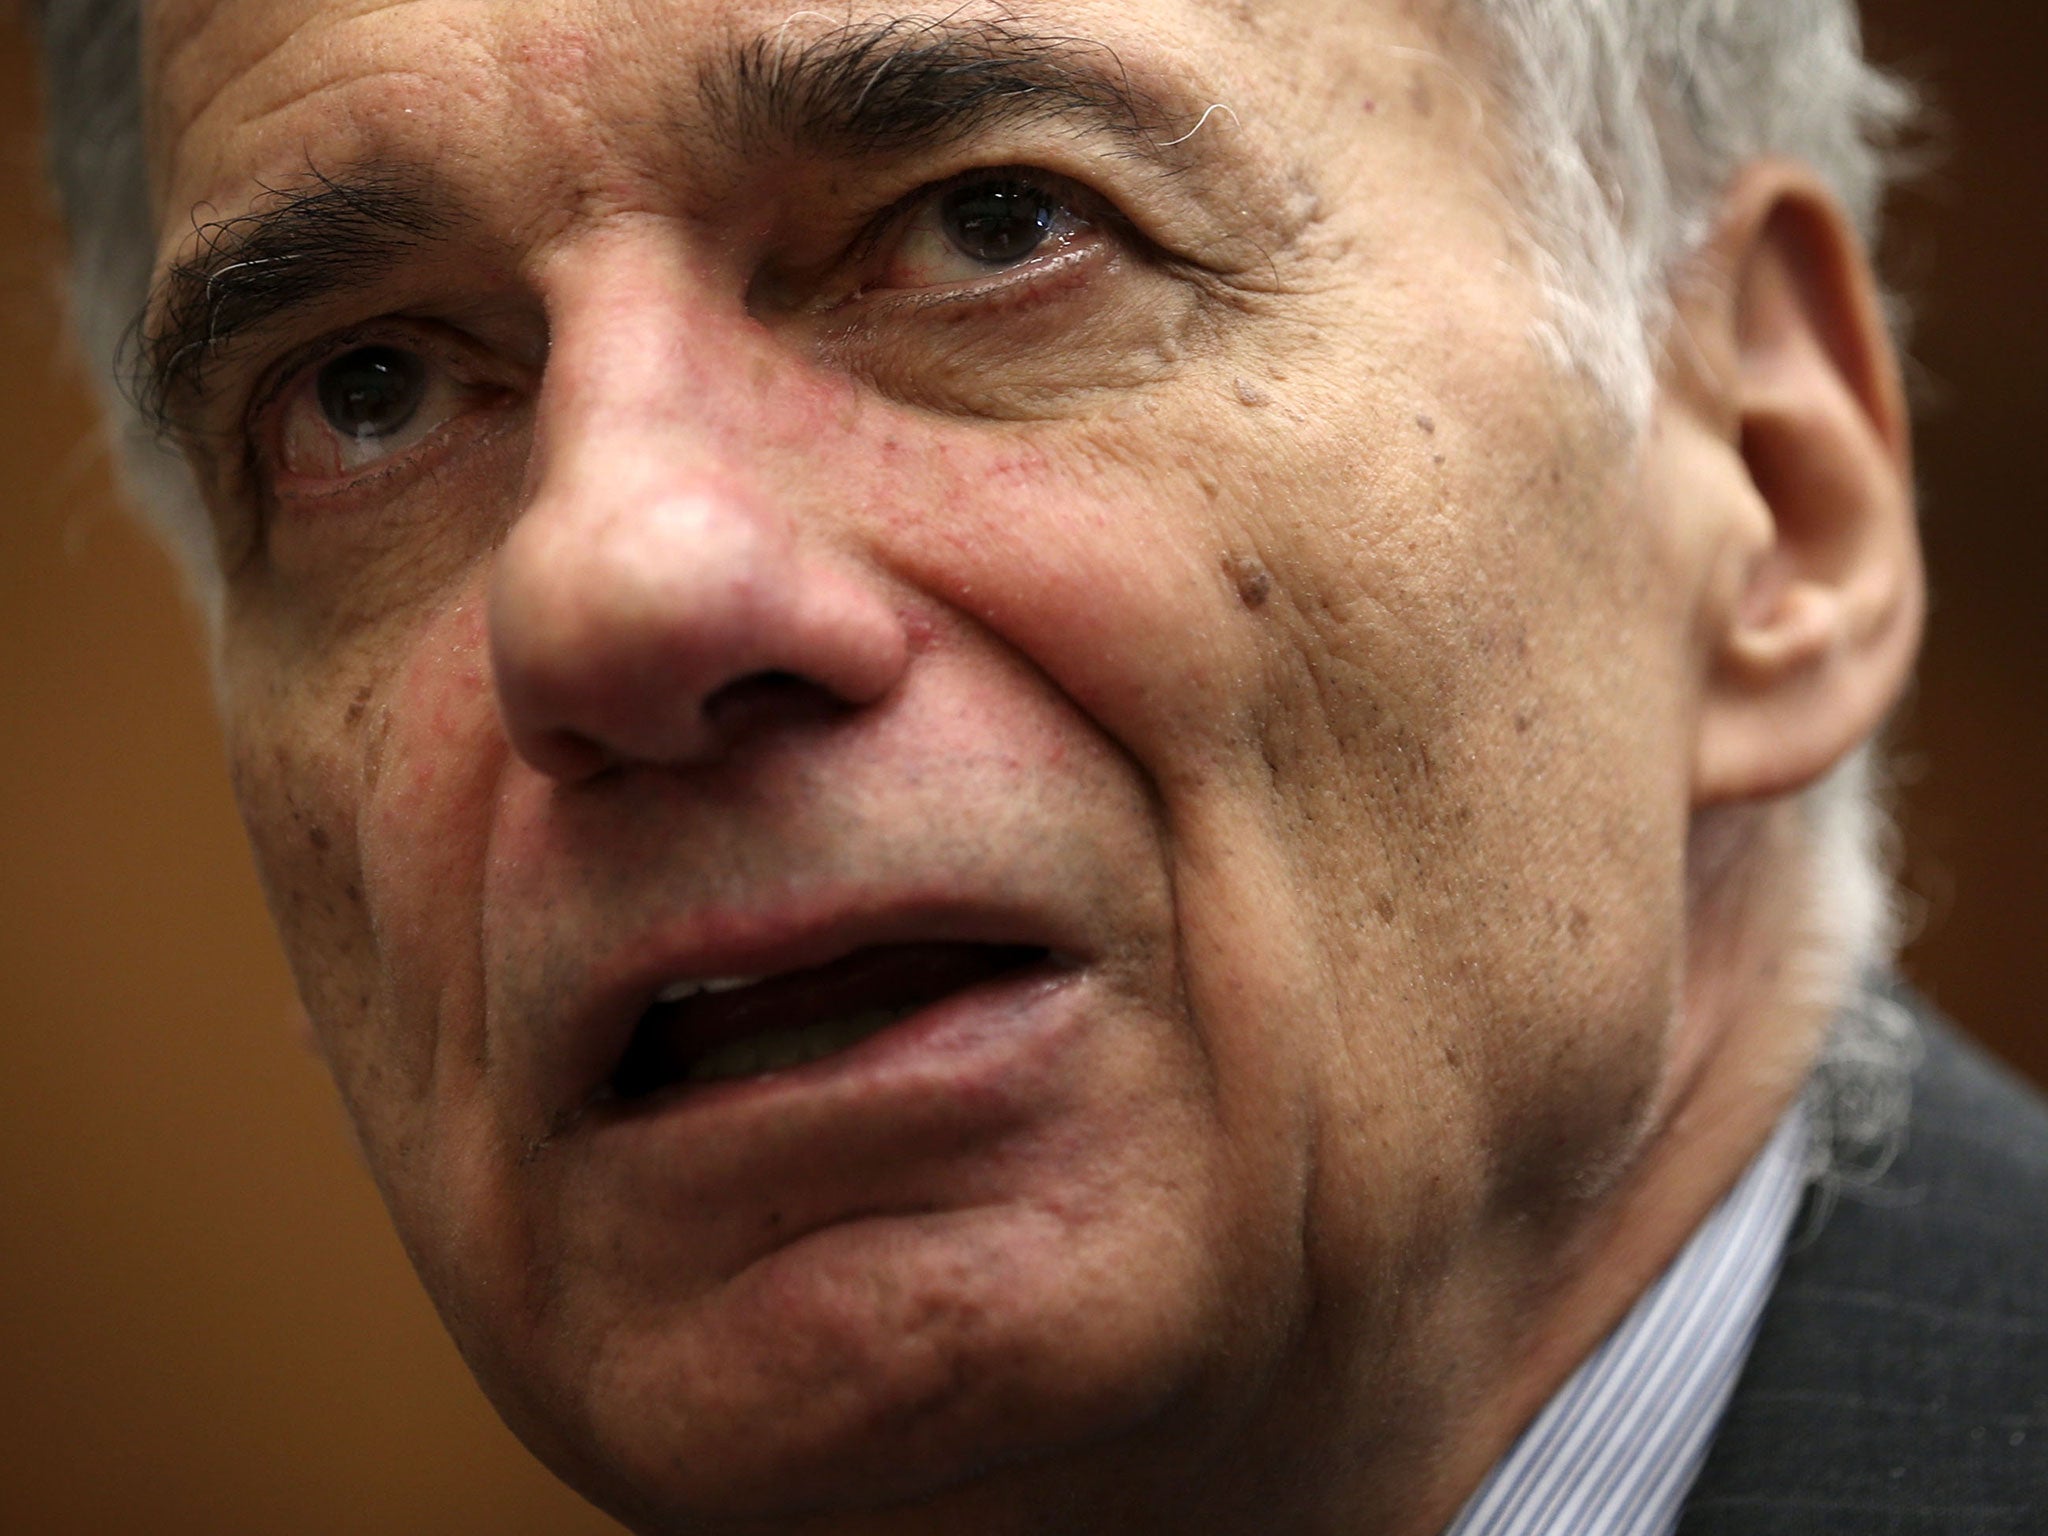 Former Green Party candidate Ralph Nader